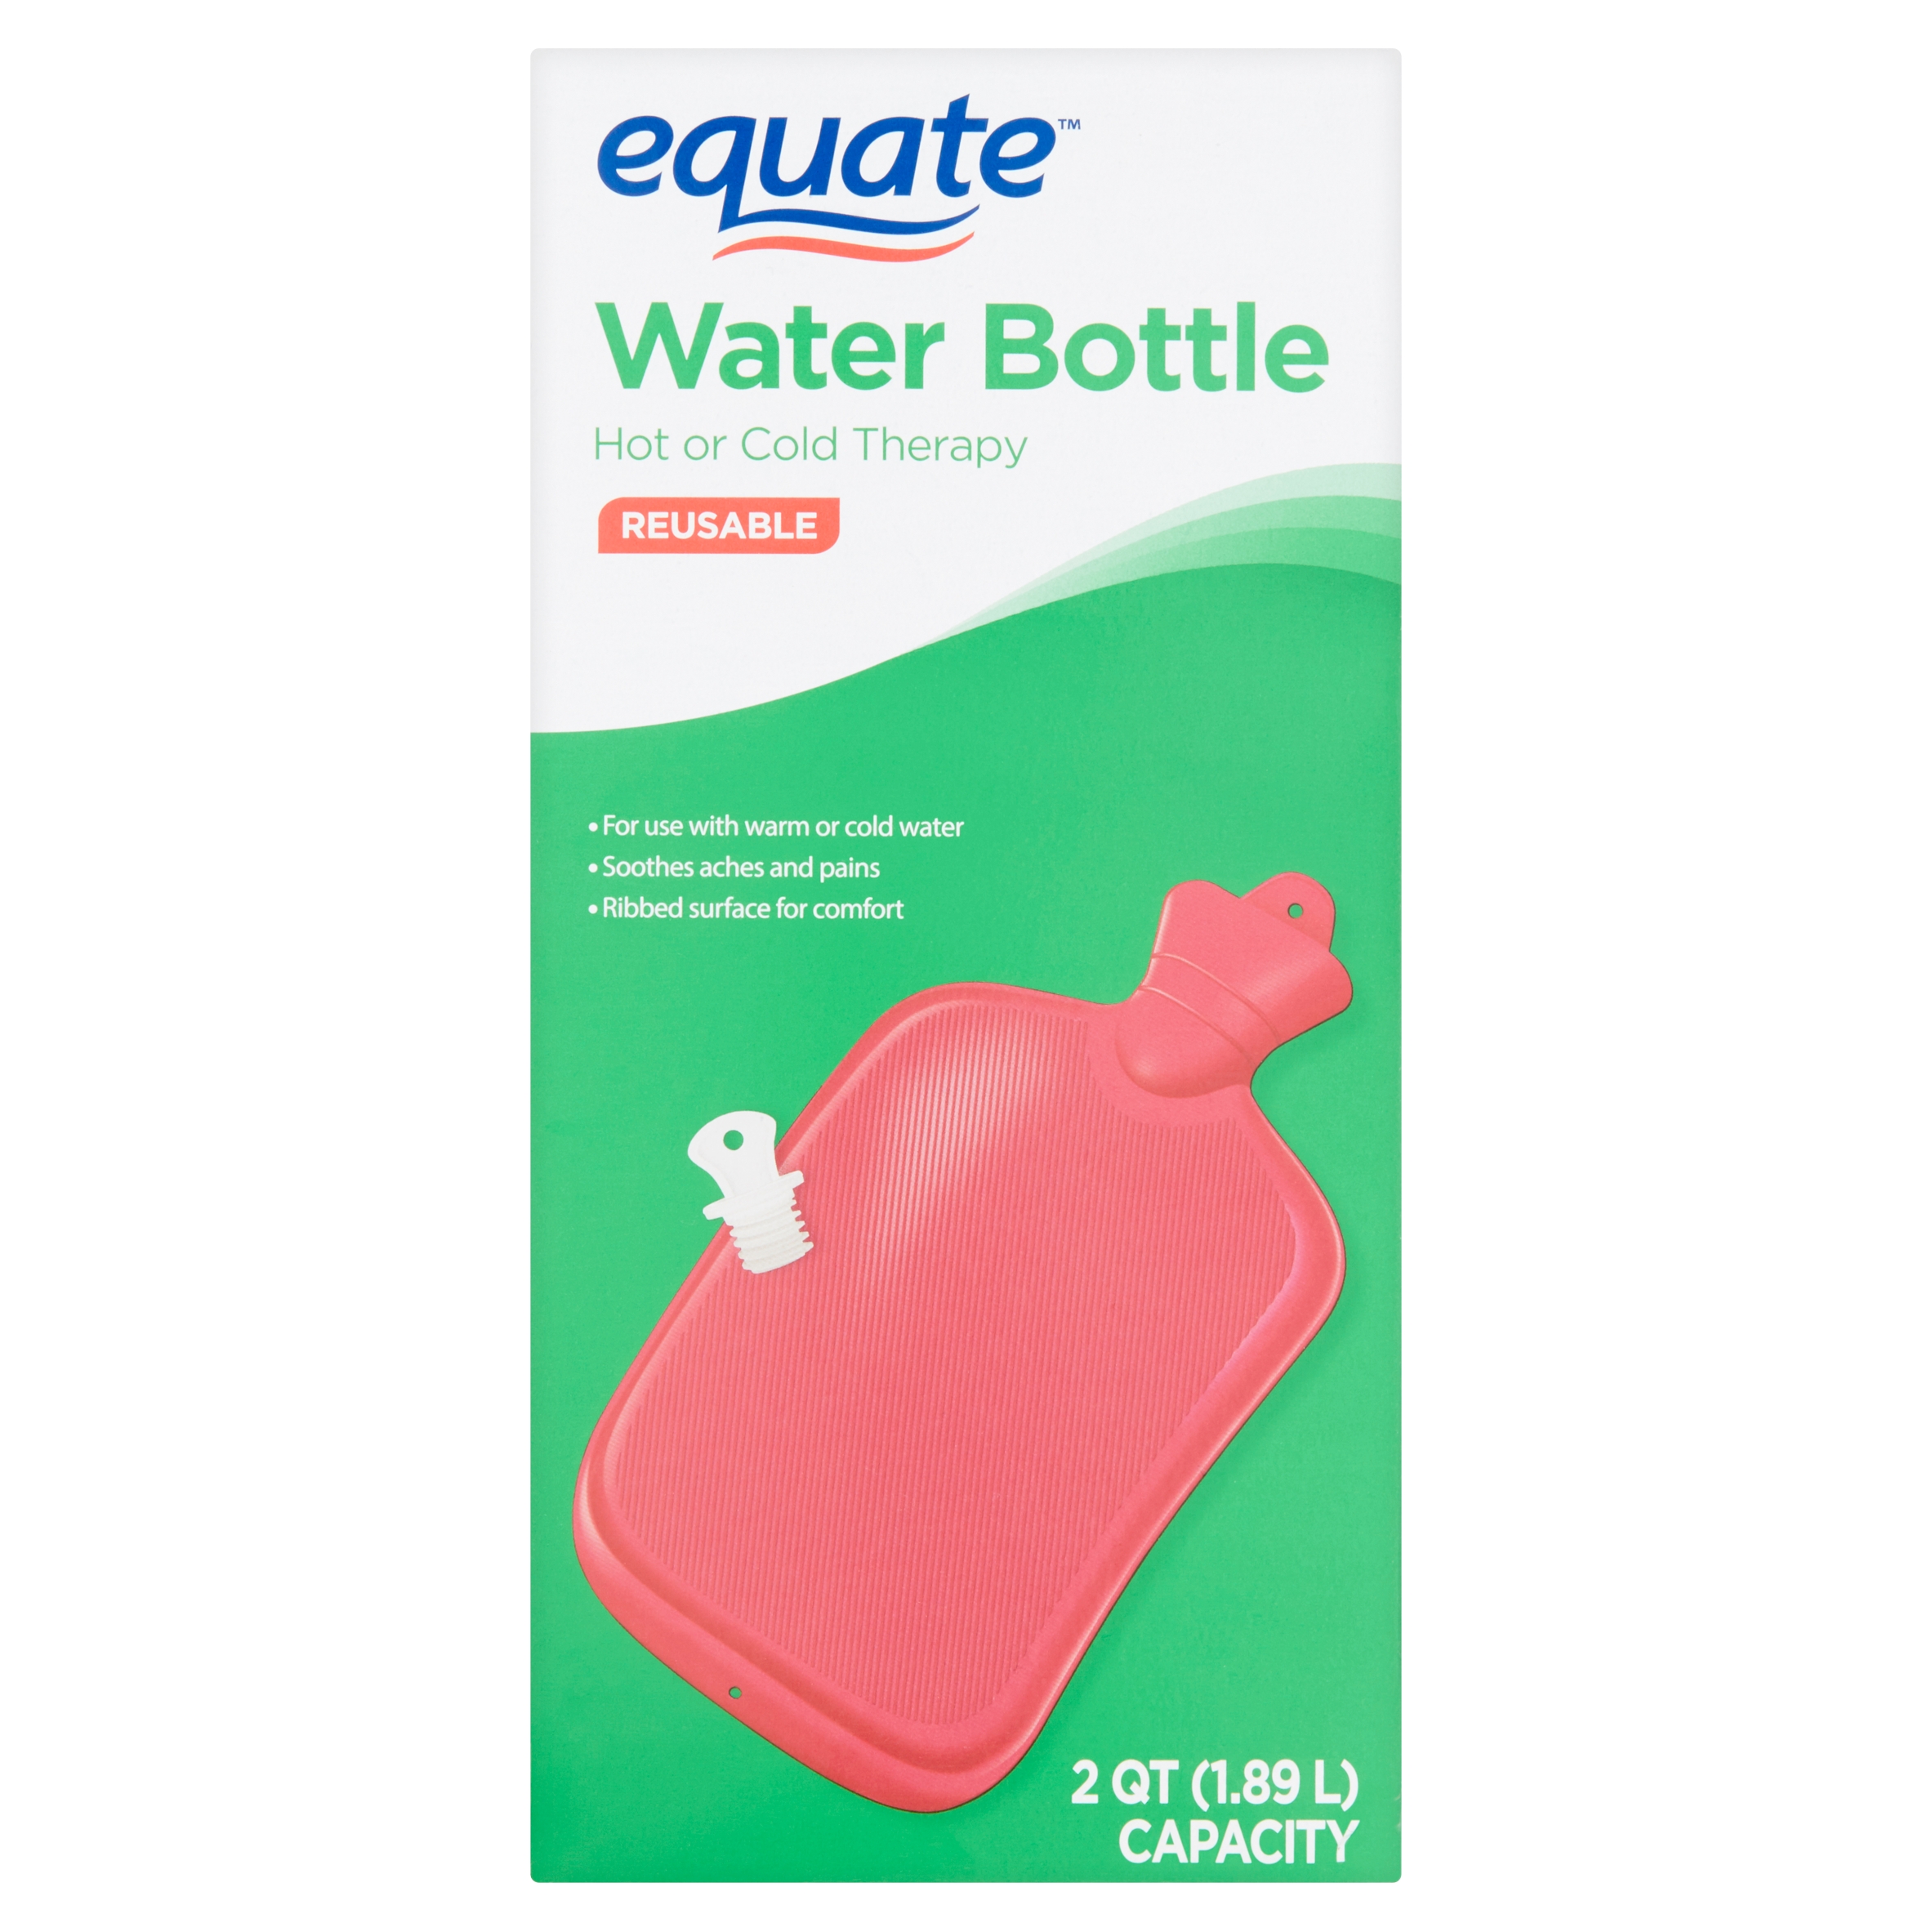 Equate Reusable Hot or Cold Therapy Water Bottle, 2 Qt, Red - image 1 of 9